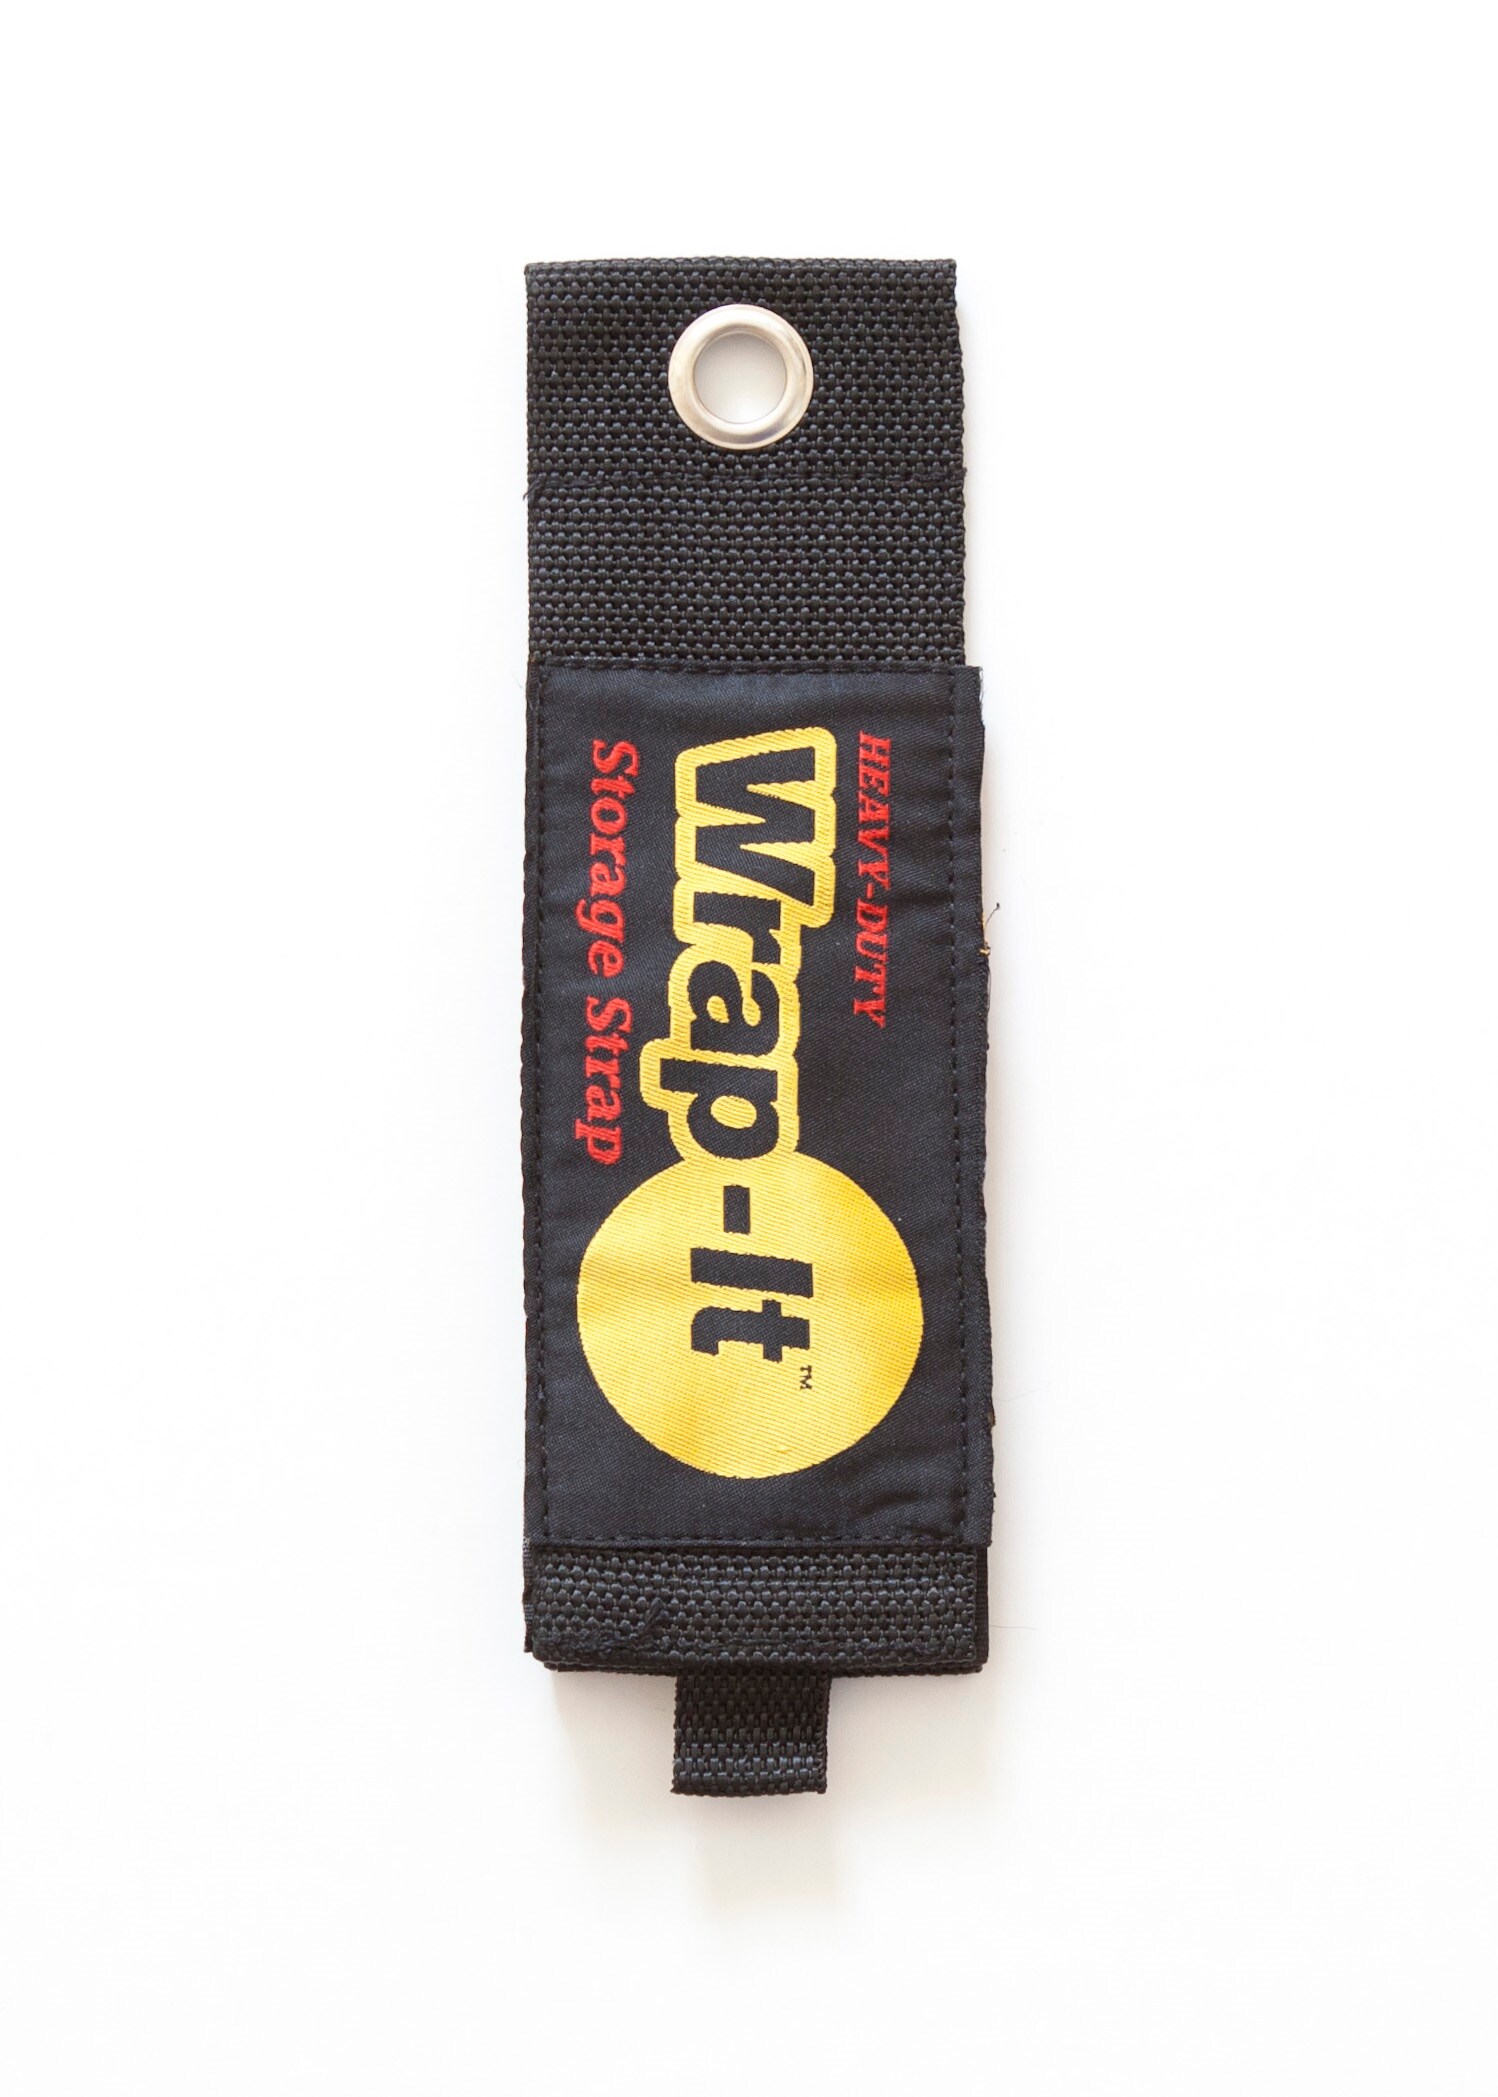 VELCRO Brand 32-in Easy Hang Large Strap 32In X 1.5In 300 Lbs